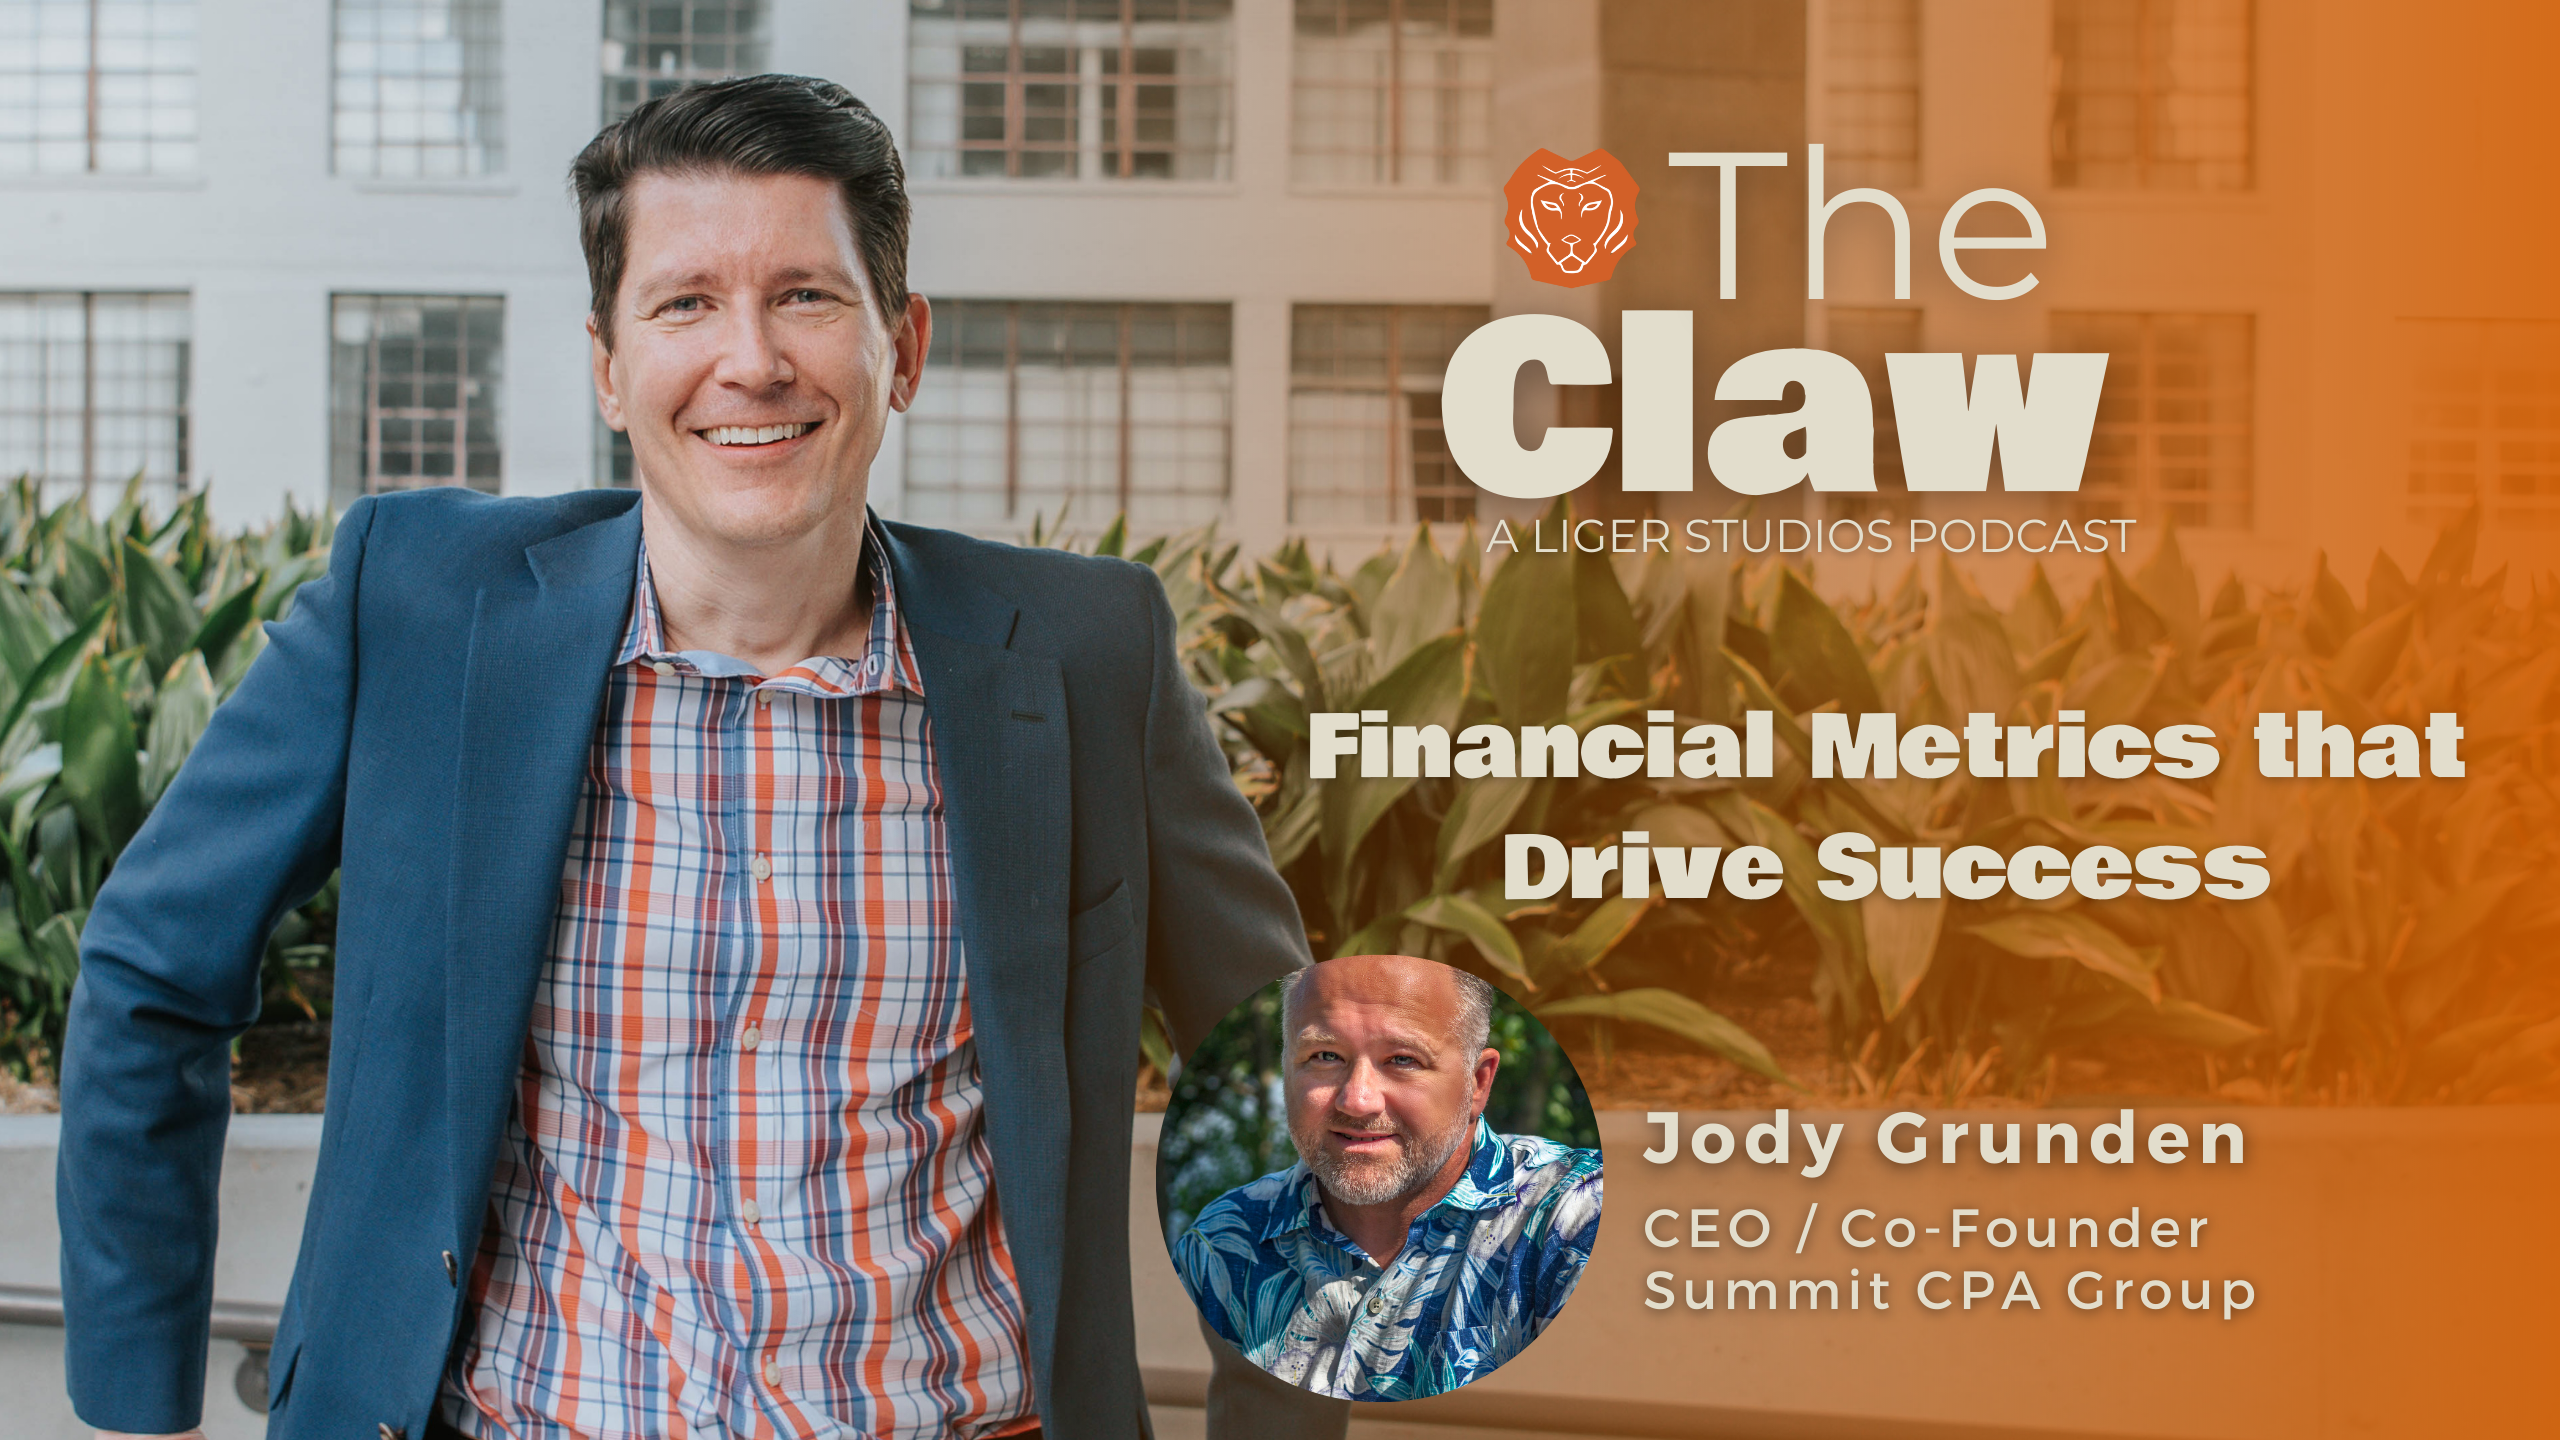 The Claw Podcast: Financial Metrics that Drive Success with Jody Grunden